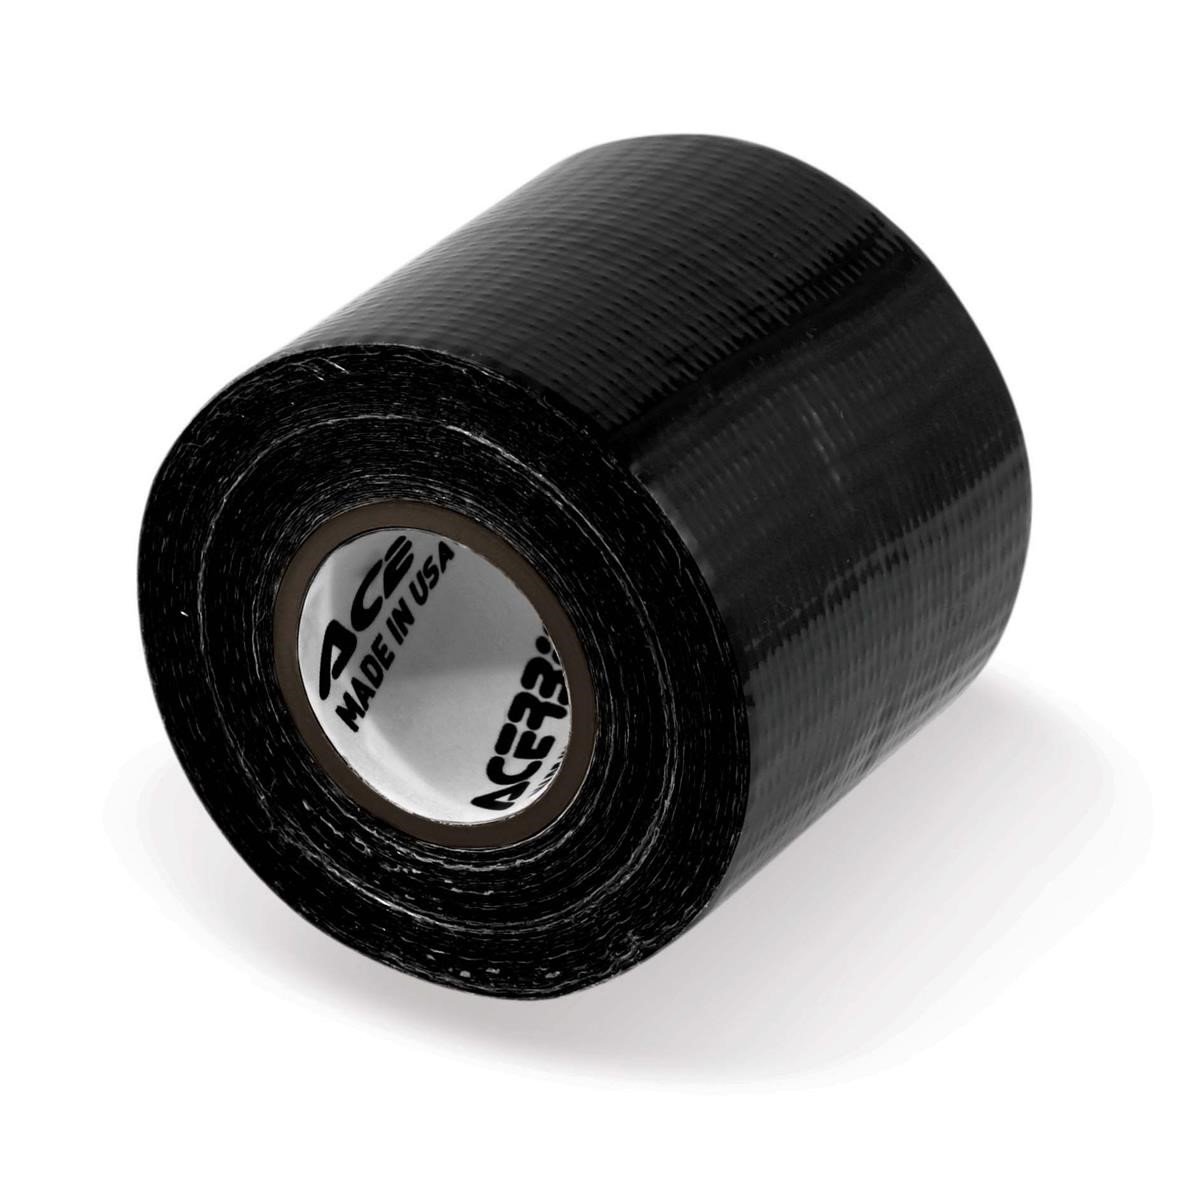 Acerbis Duct Tape USA Duct Tape Black, 10 m